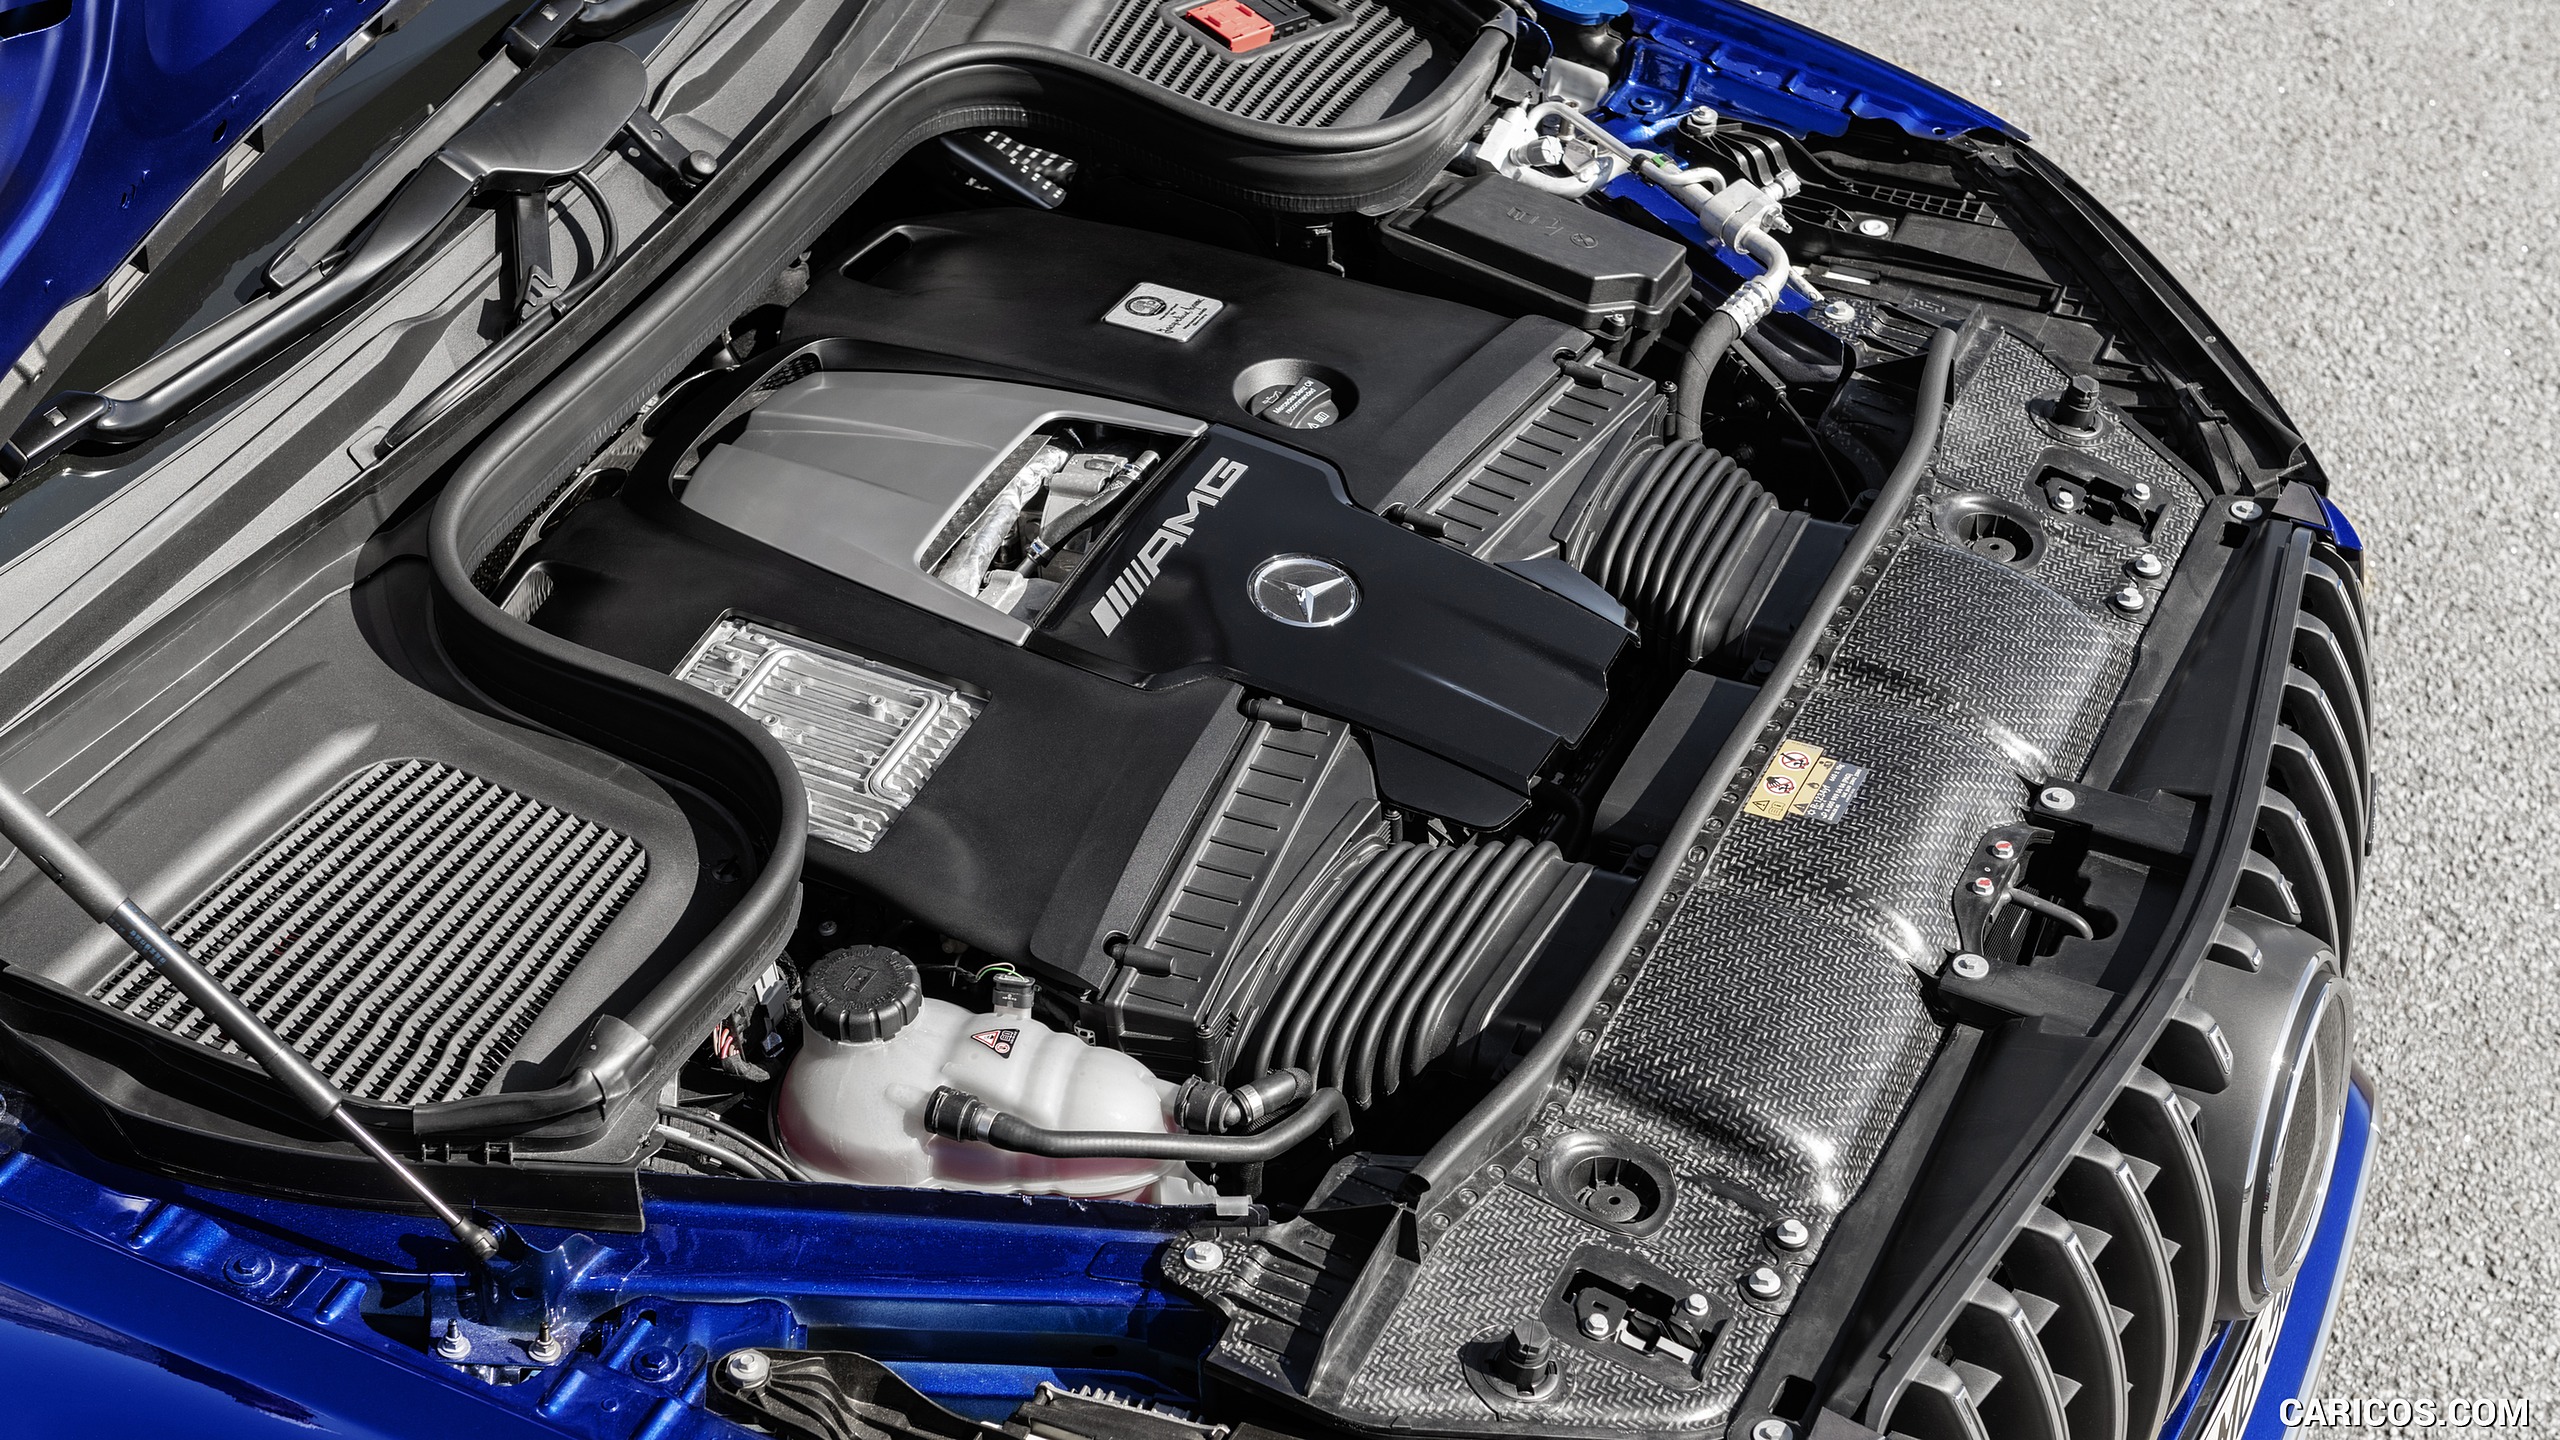 2021 Mercedes-AMG GLE 63 S 4MATIC - Engine, #26 of 187